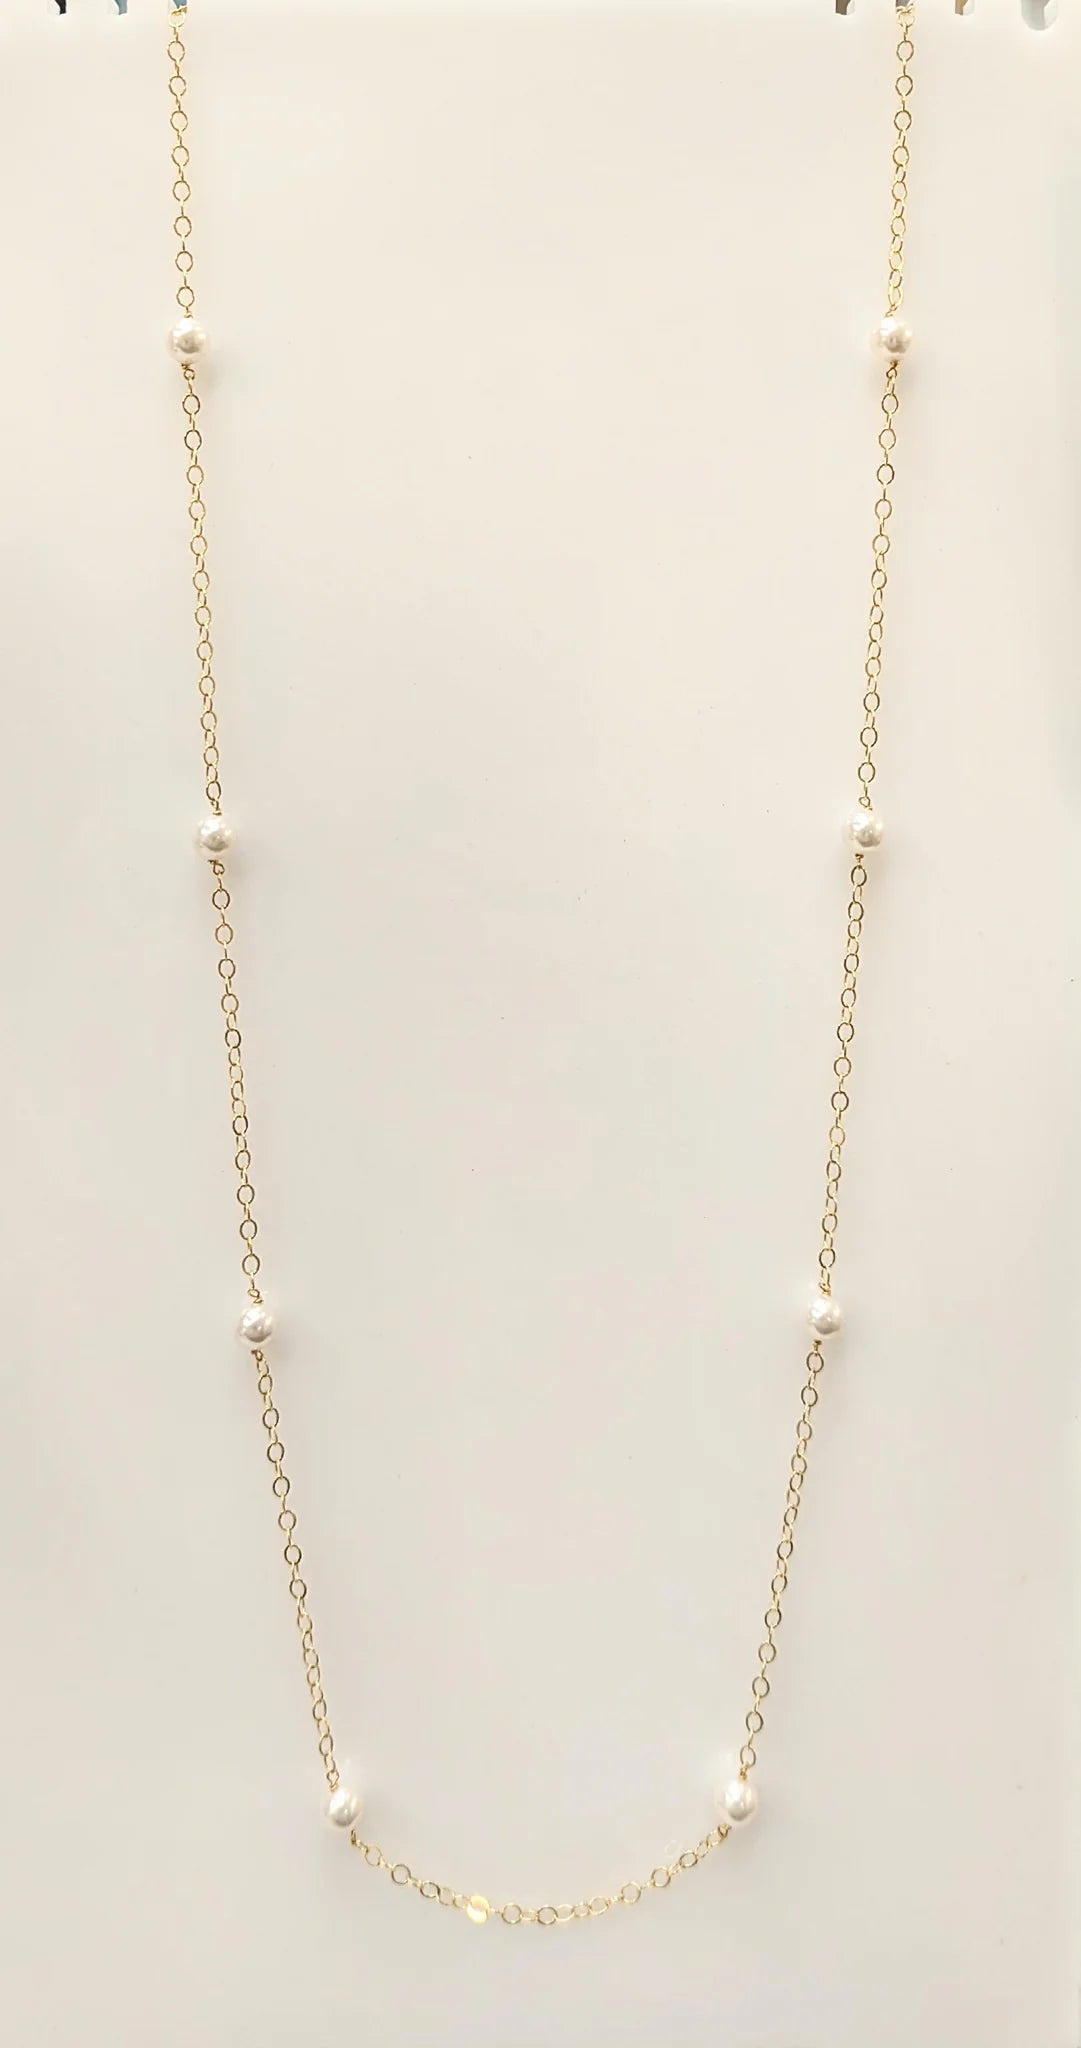 41" Necklace Simplicity Chain Gold -8mm Pearl